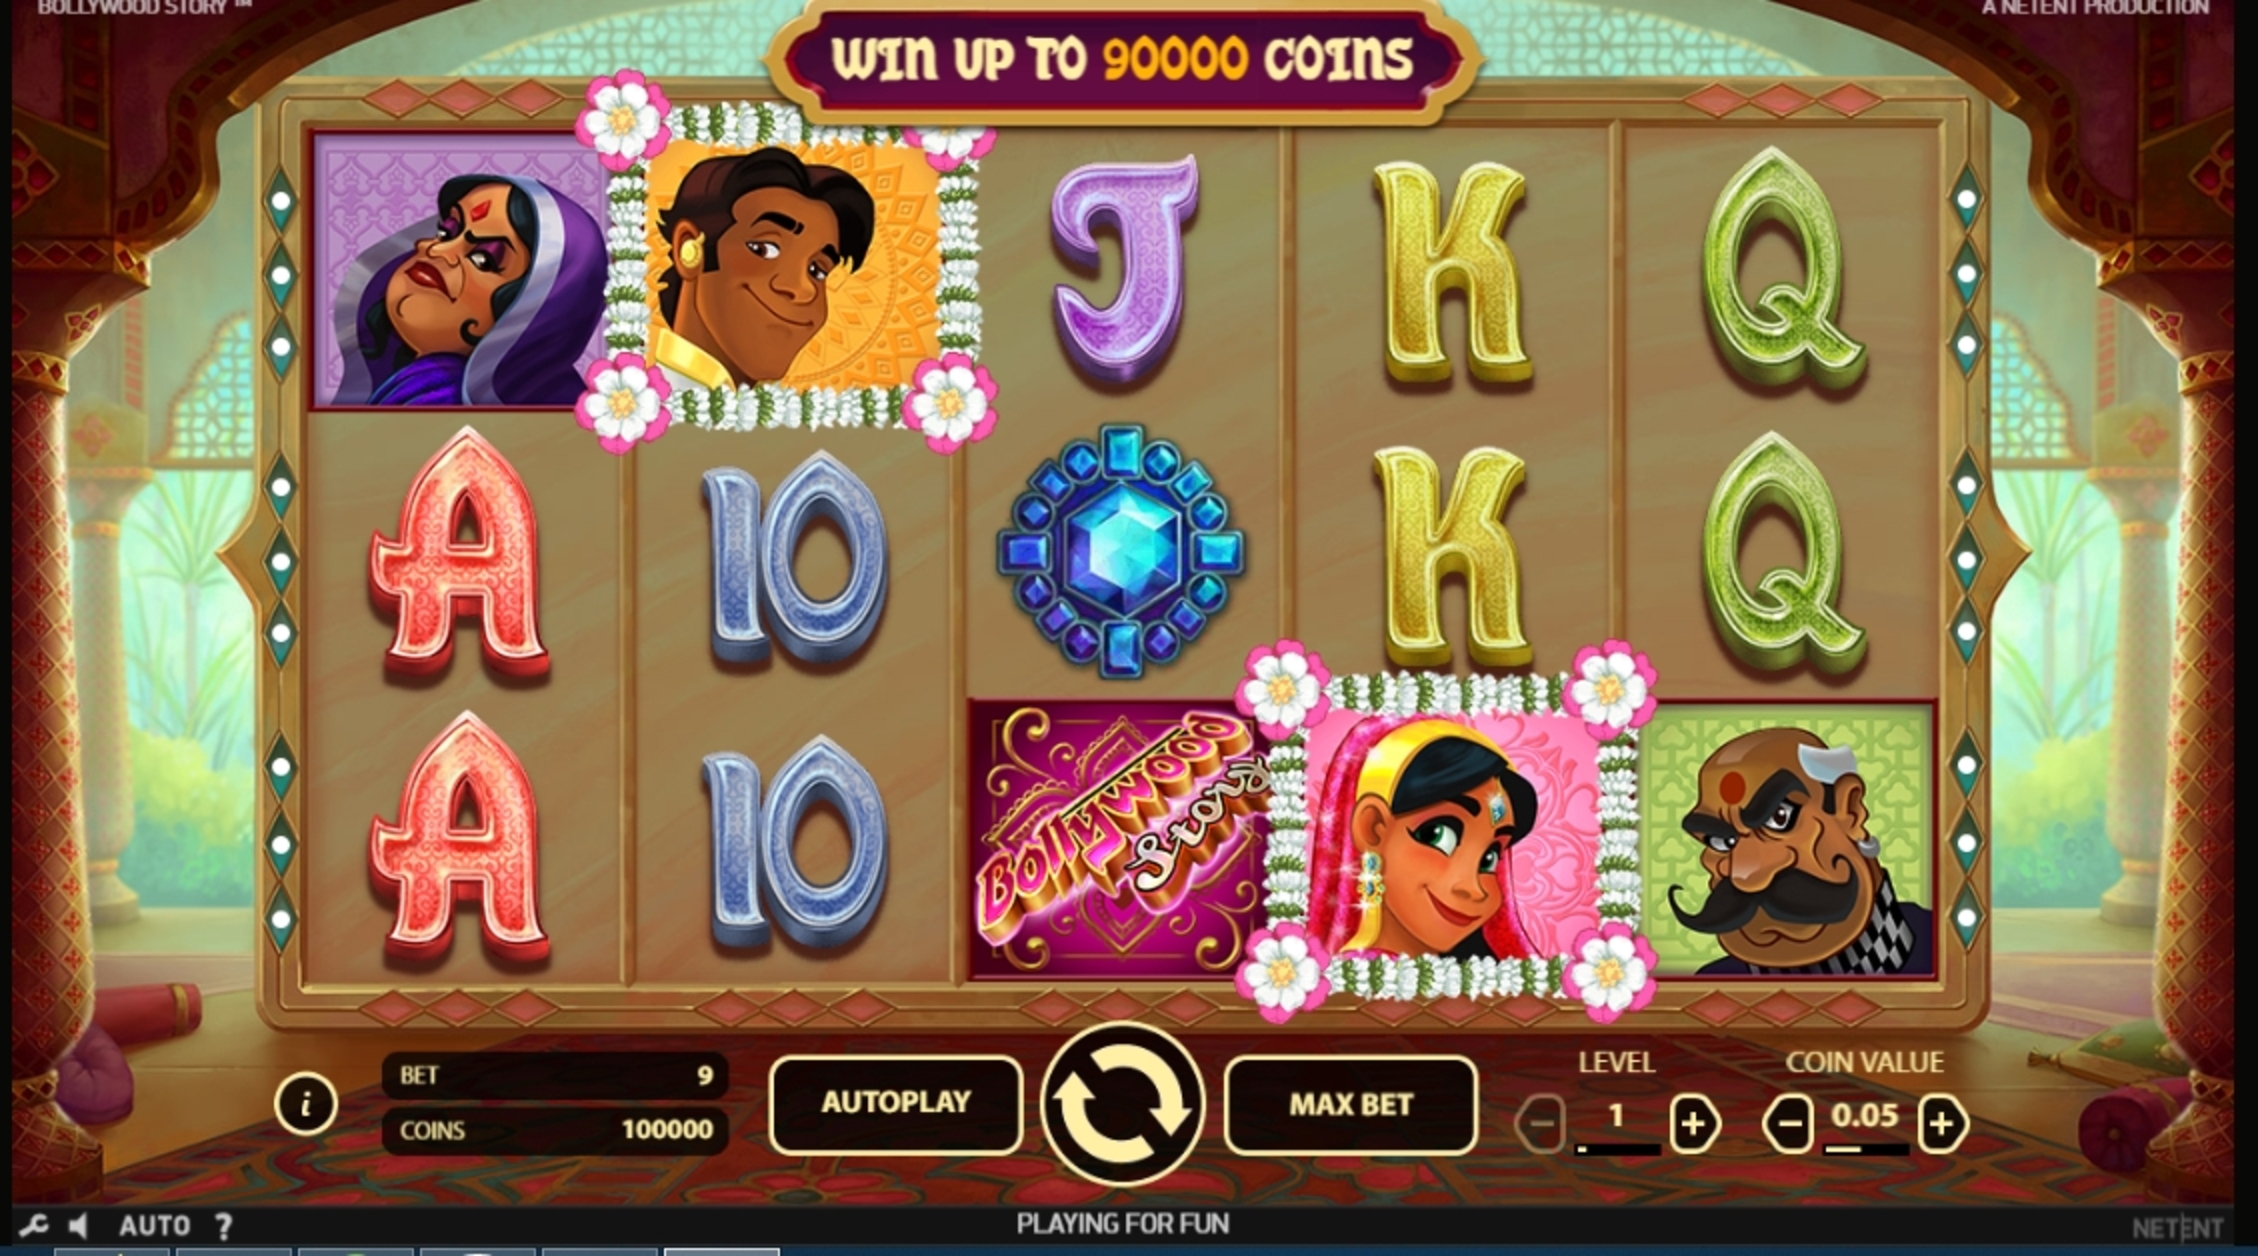 Reels in Bollywood Story Slot Game by NetEnt